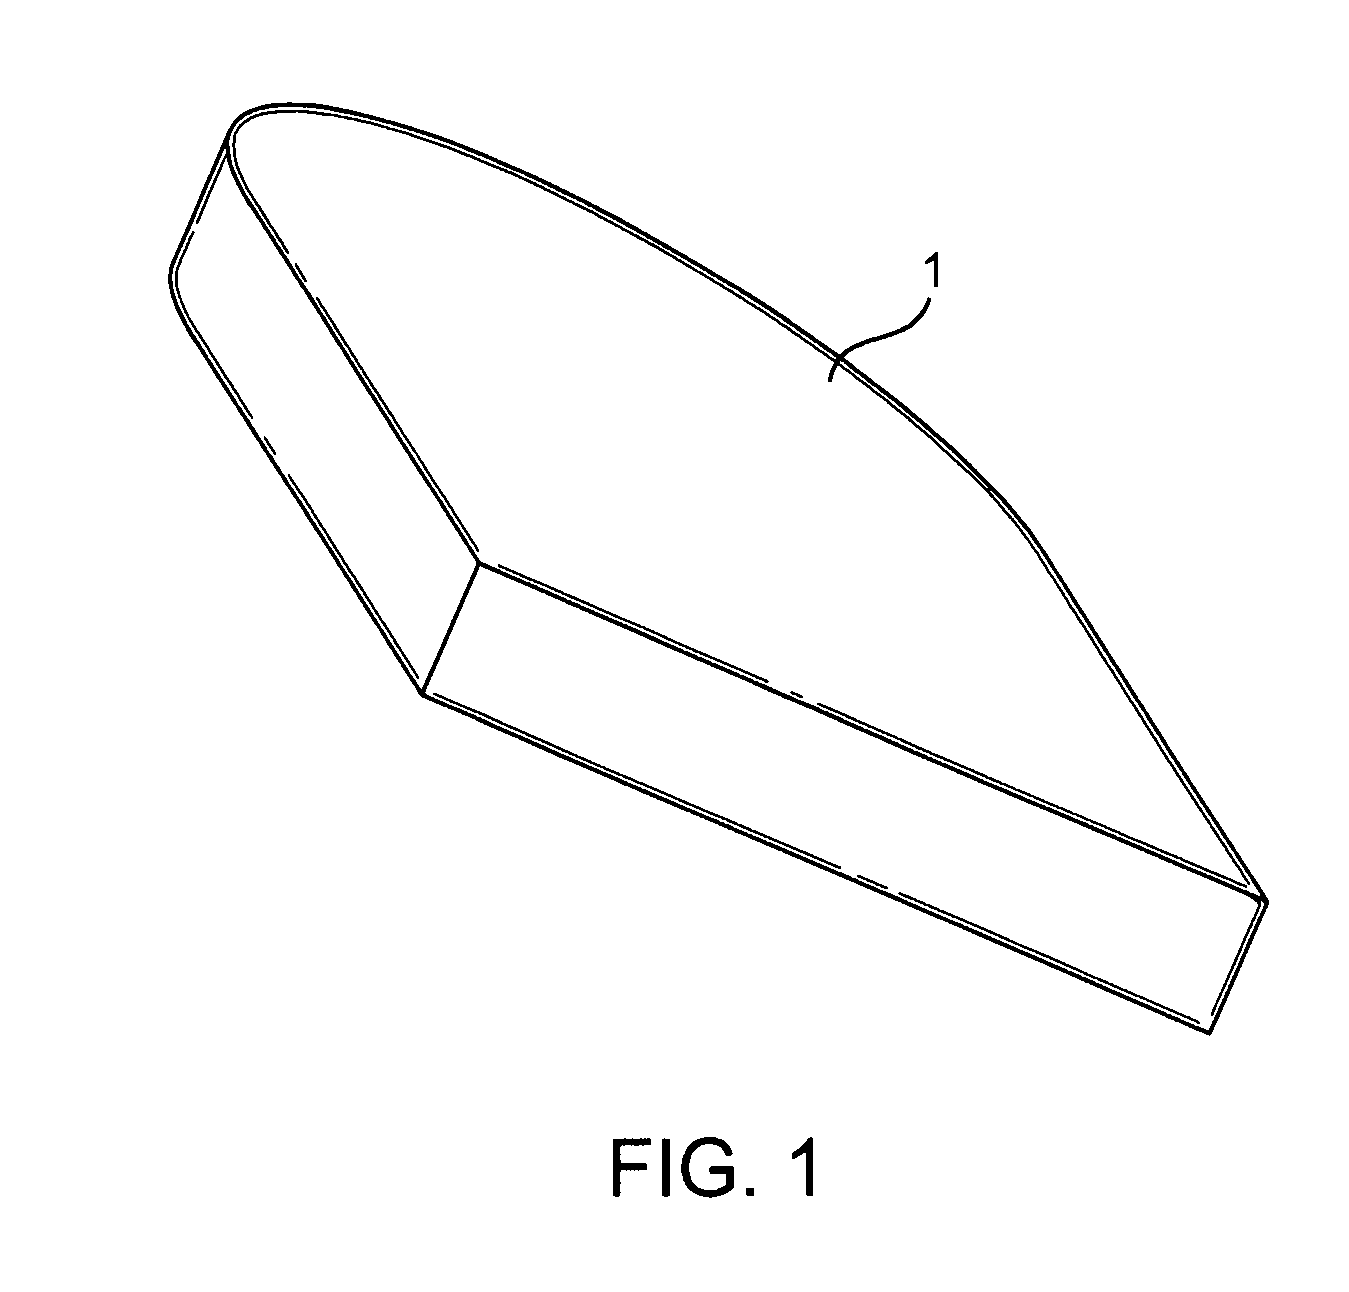 Head restraint system for medical research, diagnosis and operation